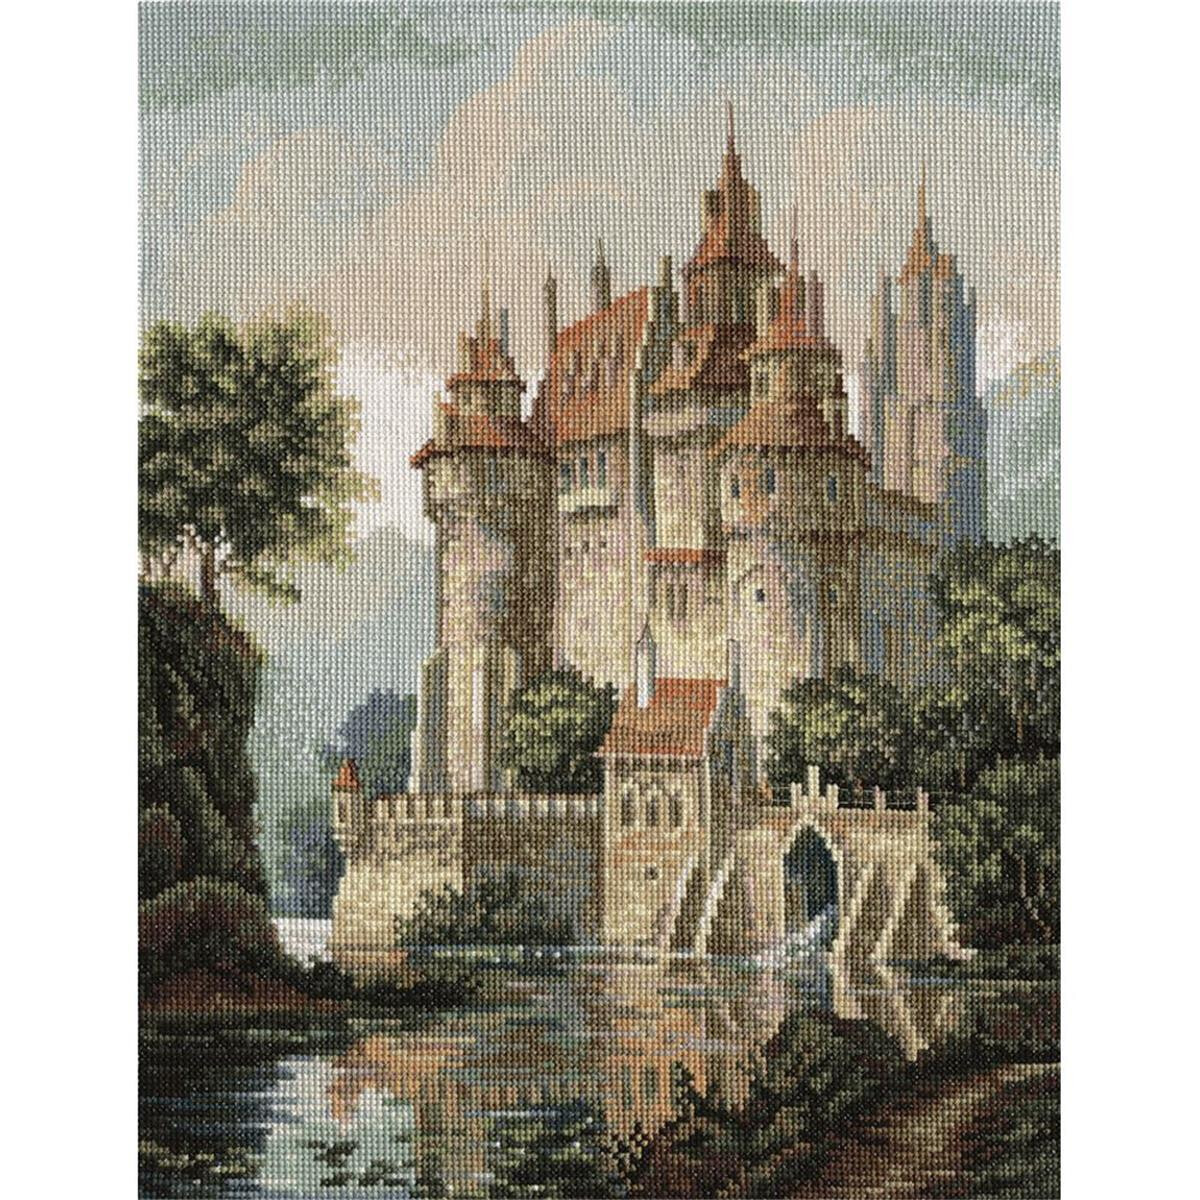 Panna counted cross stitch kit "Castle in the...